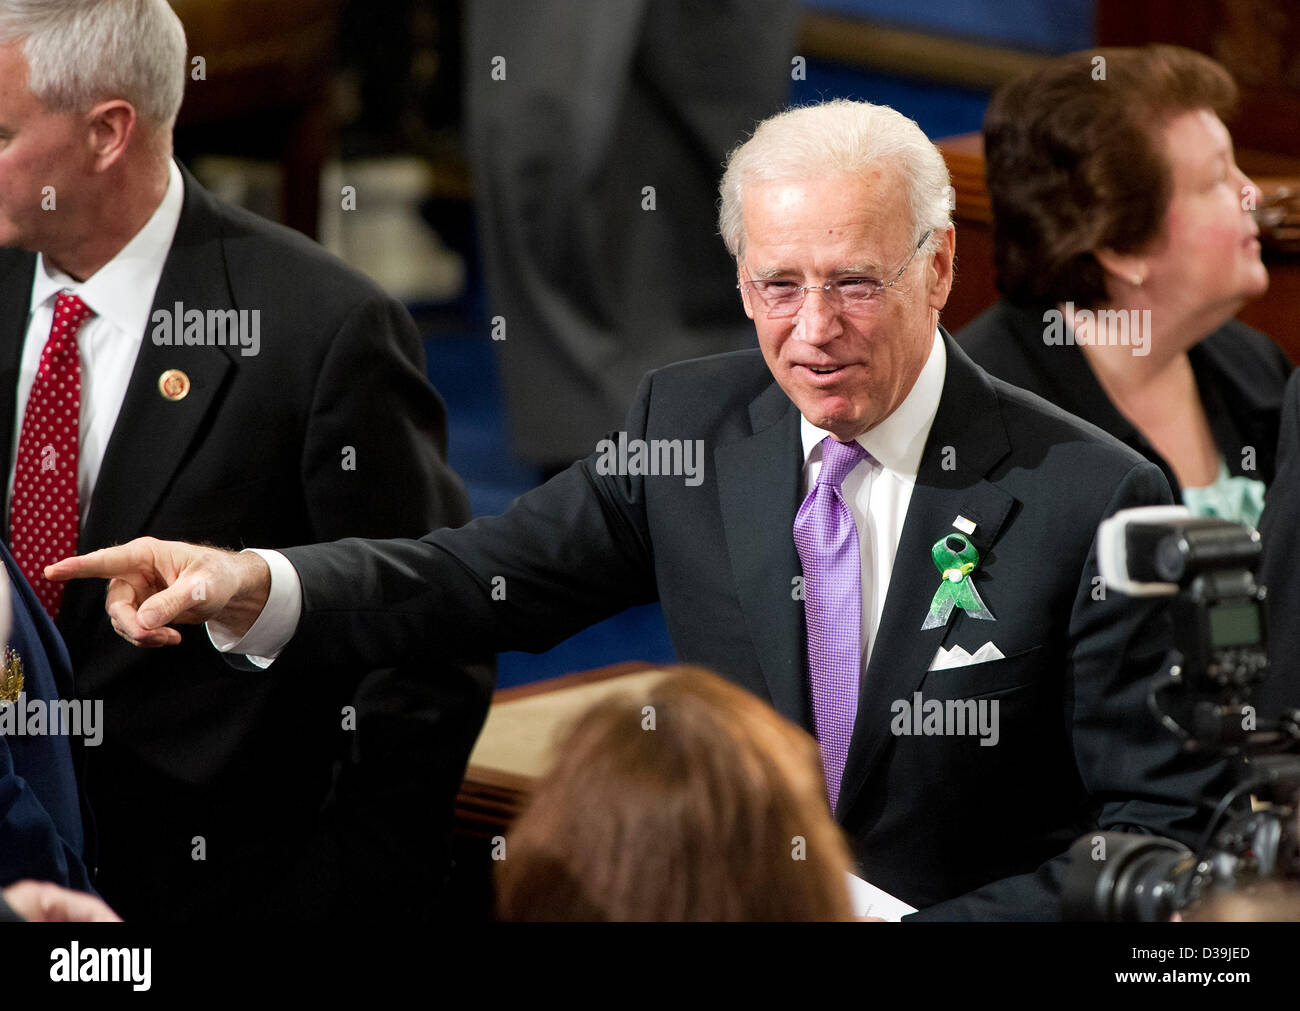 united-states-vice-president-joe-biden-gestures-as-he-enters-the-us-D39JED.jpg